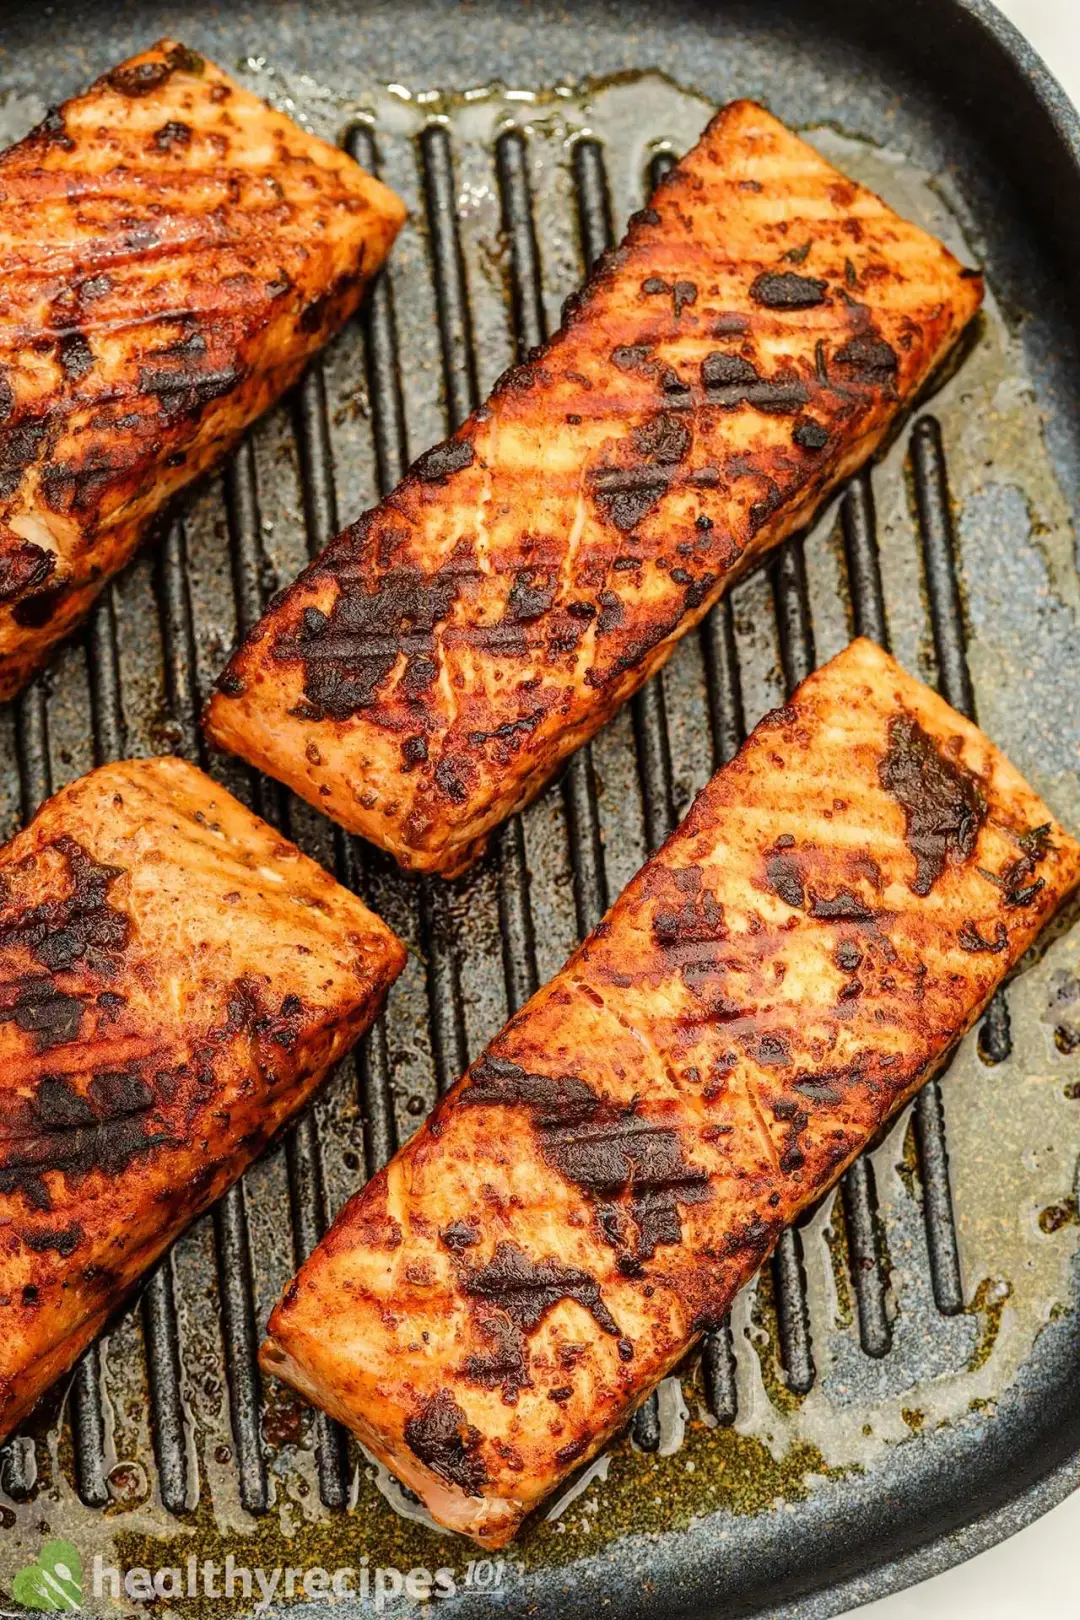 A close-up shot of seared salmon fillets in a cast iron skillet